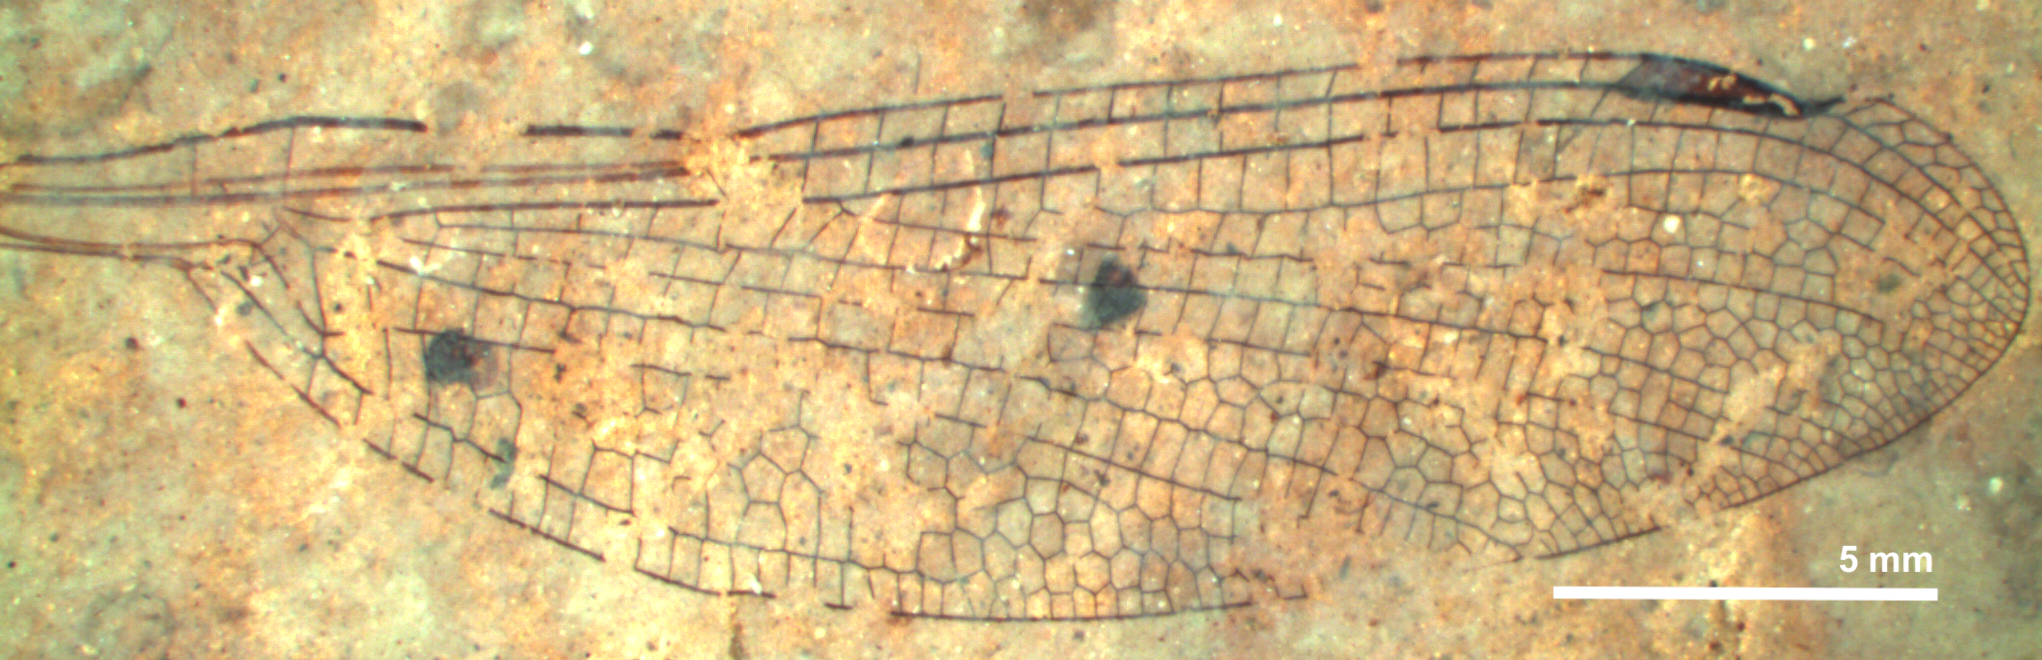 Fossil damselflies exist in the Kishenehn Formation only as isolated wings.Picture